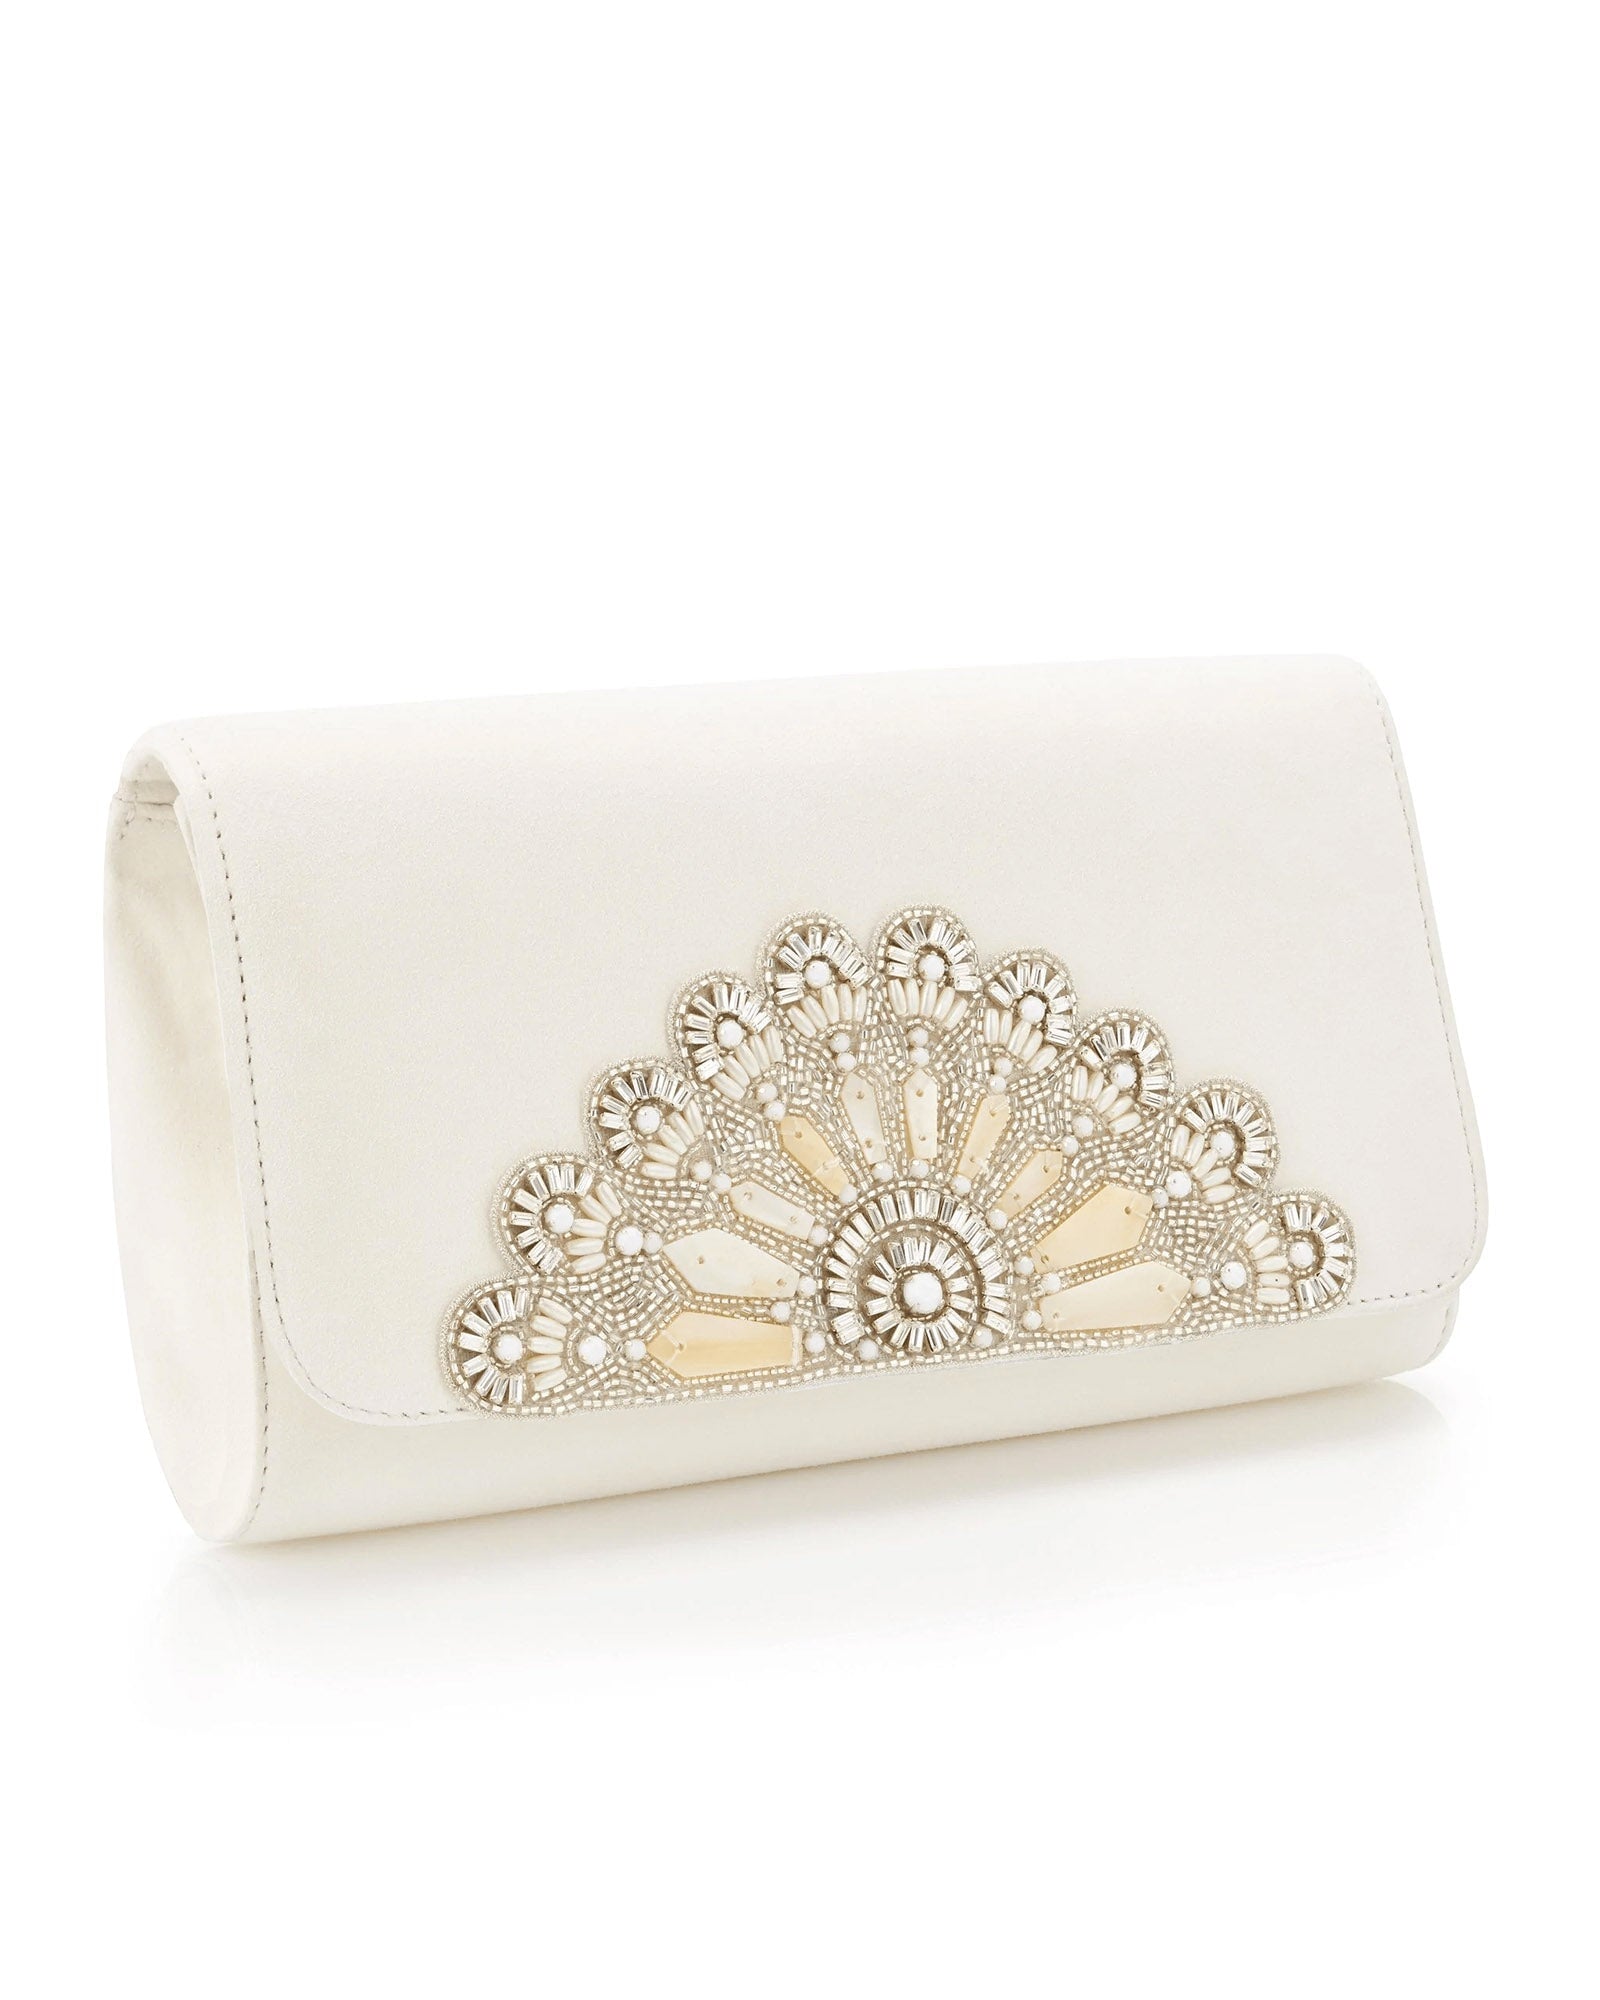 Bridal Clutches, Purses, and Handbags to Carry on Your Big Day | Vogue